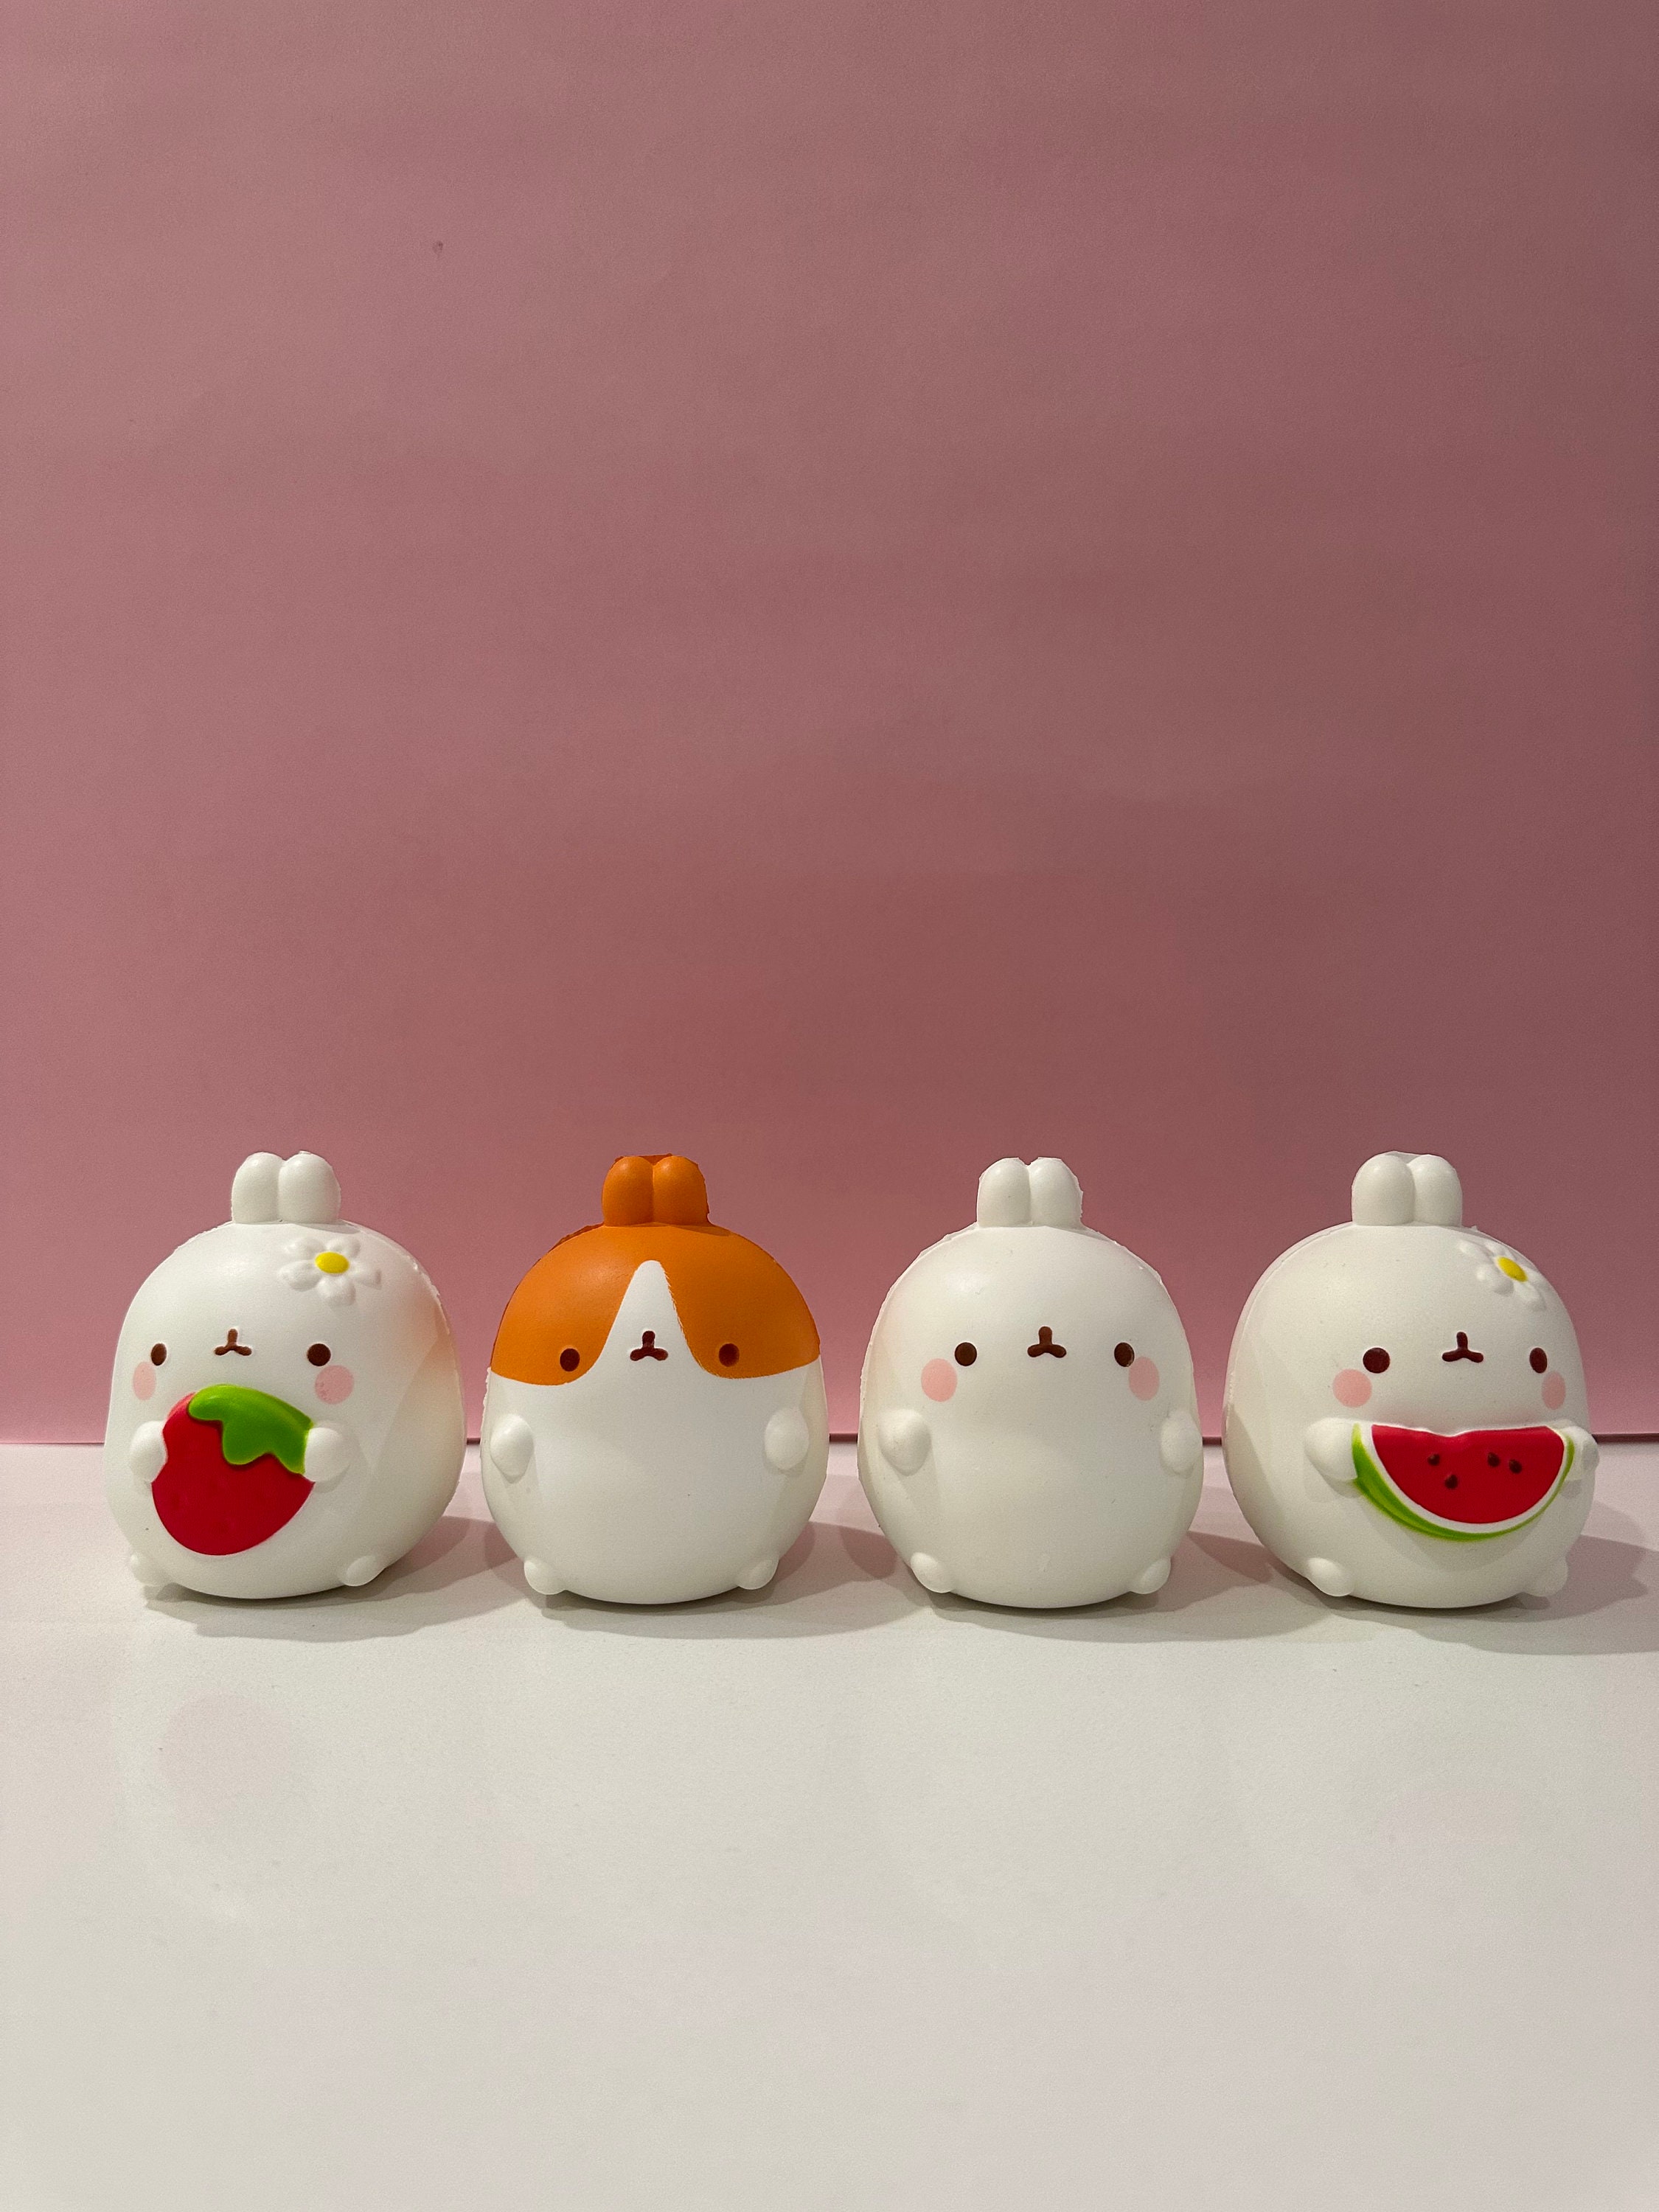 NEW adult kids Kawaii Animal Cute Chick Rabbit Strawberry Mochi Squishies  Slow Rising Stress Relief Squeeze Fidget Toys For Kid - AliExpress